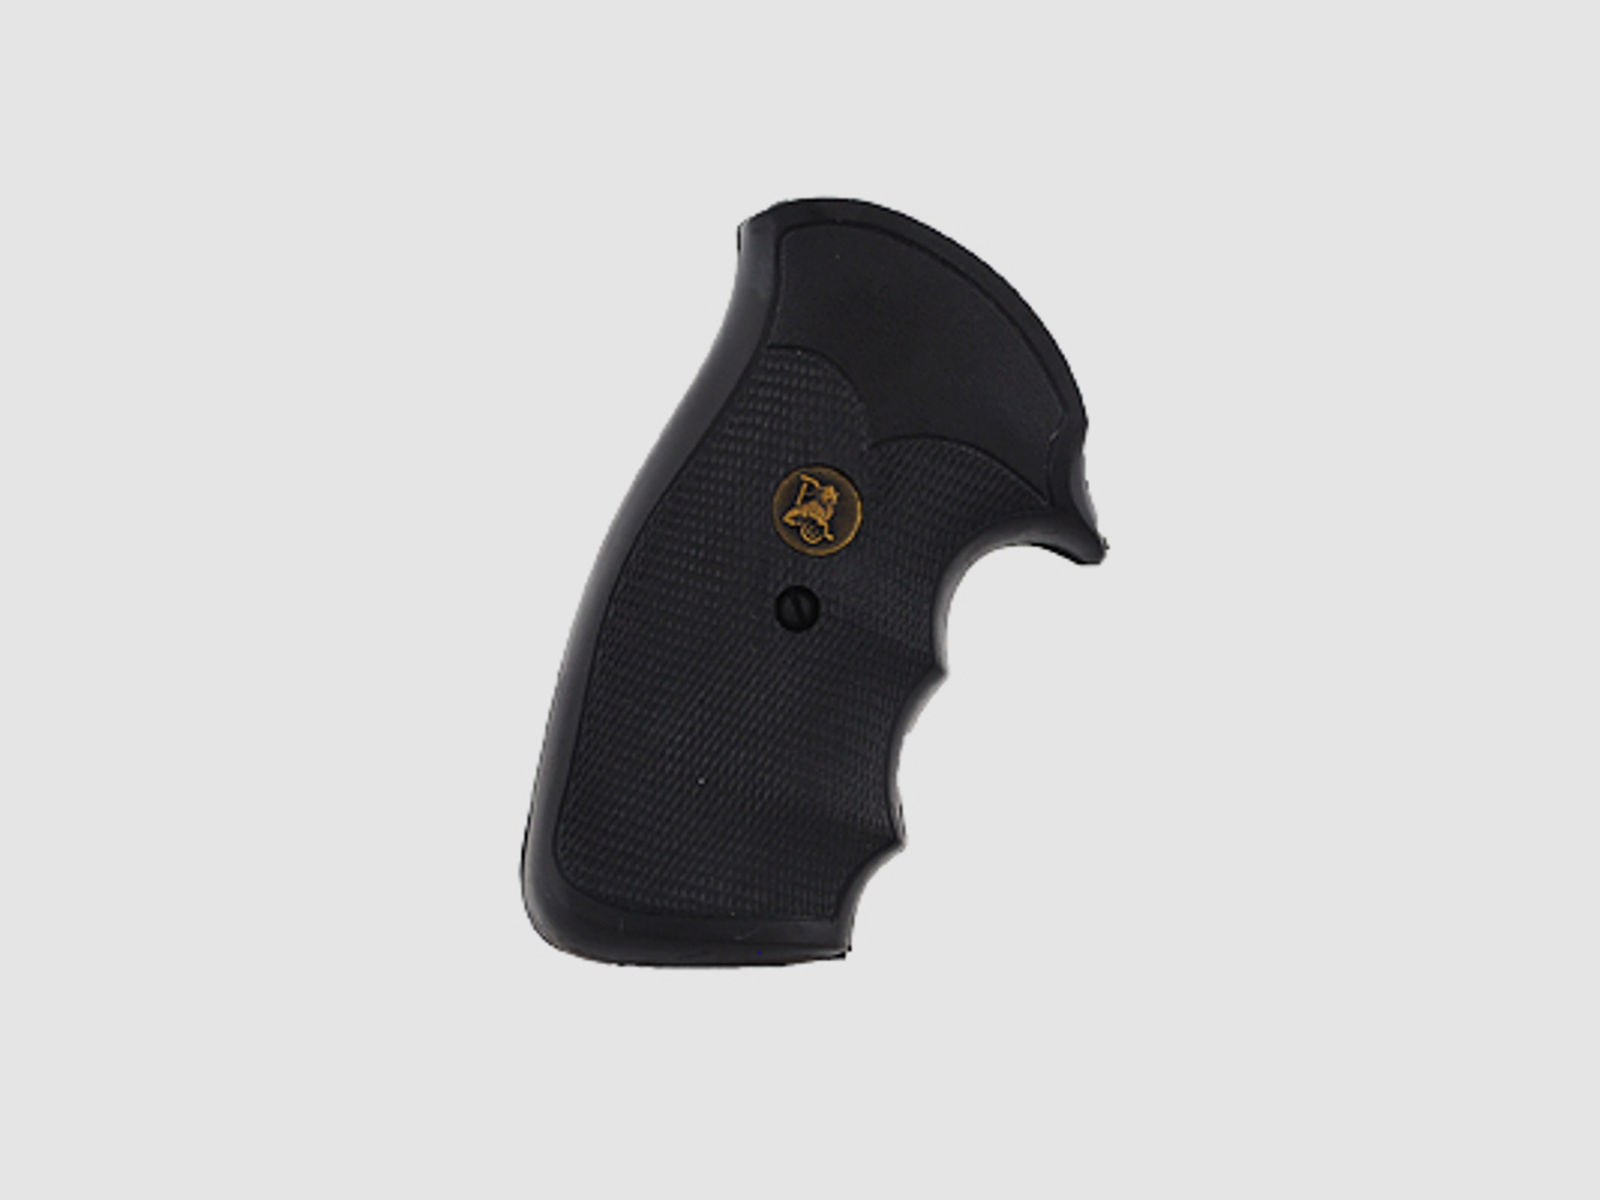 Pachmayr Griff Gripper Ruger Six Modelle